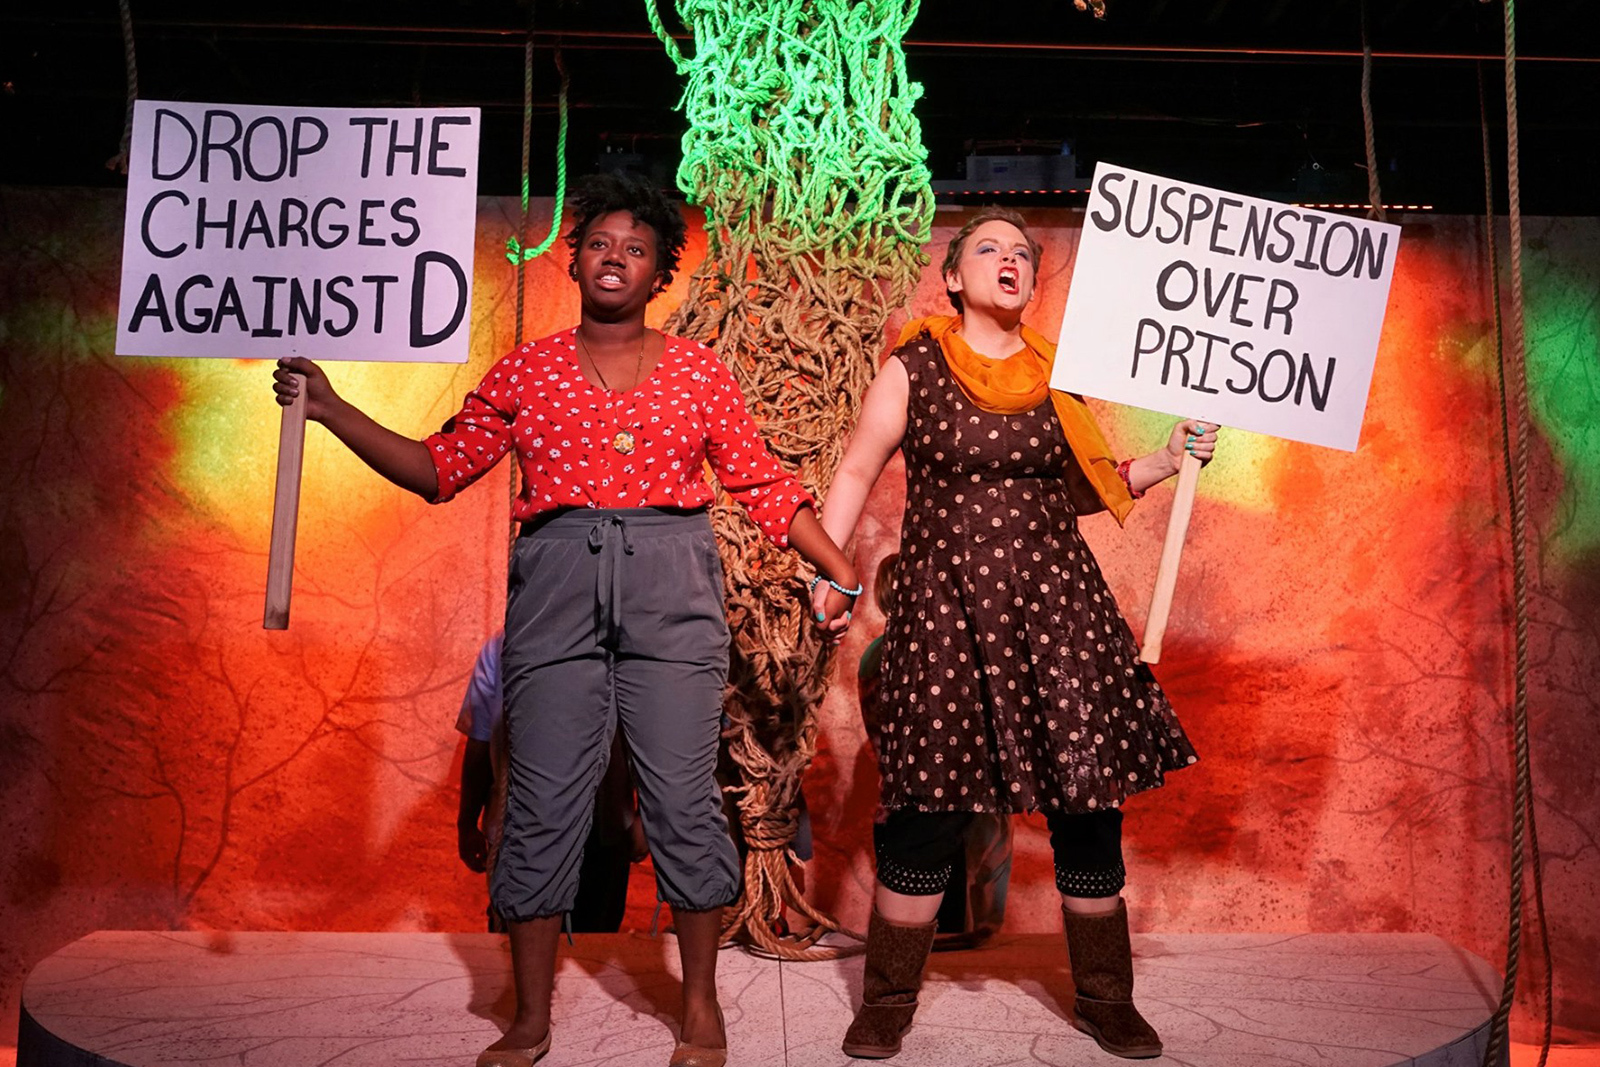 Blood at the Root Two actresses stand center stage holding hands shouting in protest Both hold a protest sign reaading Suspension Over Prison and Drop the Charges Against D